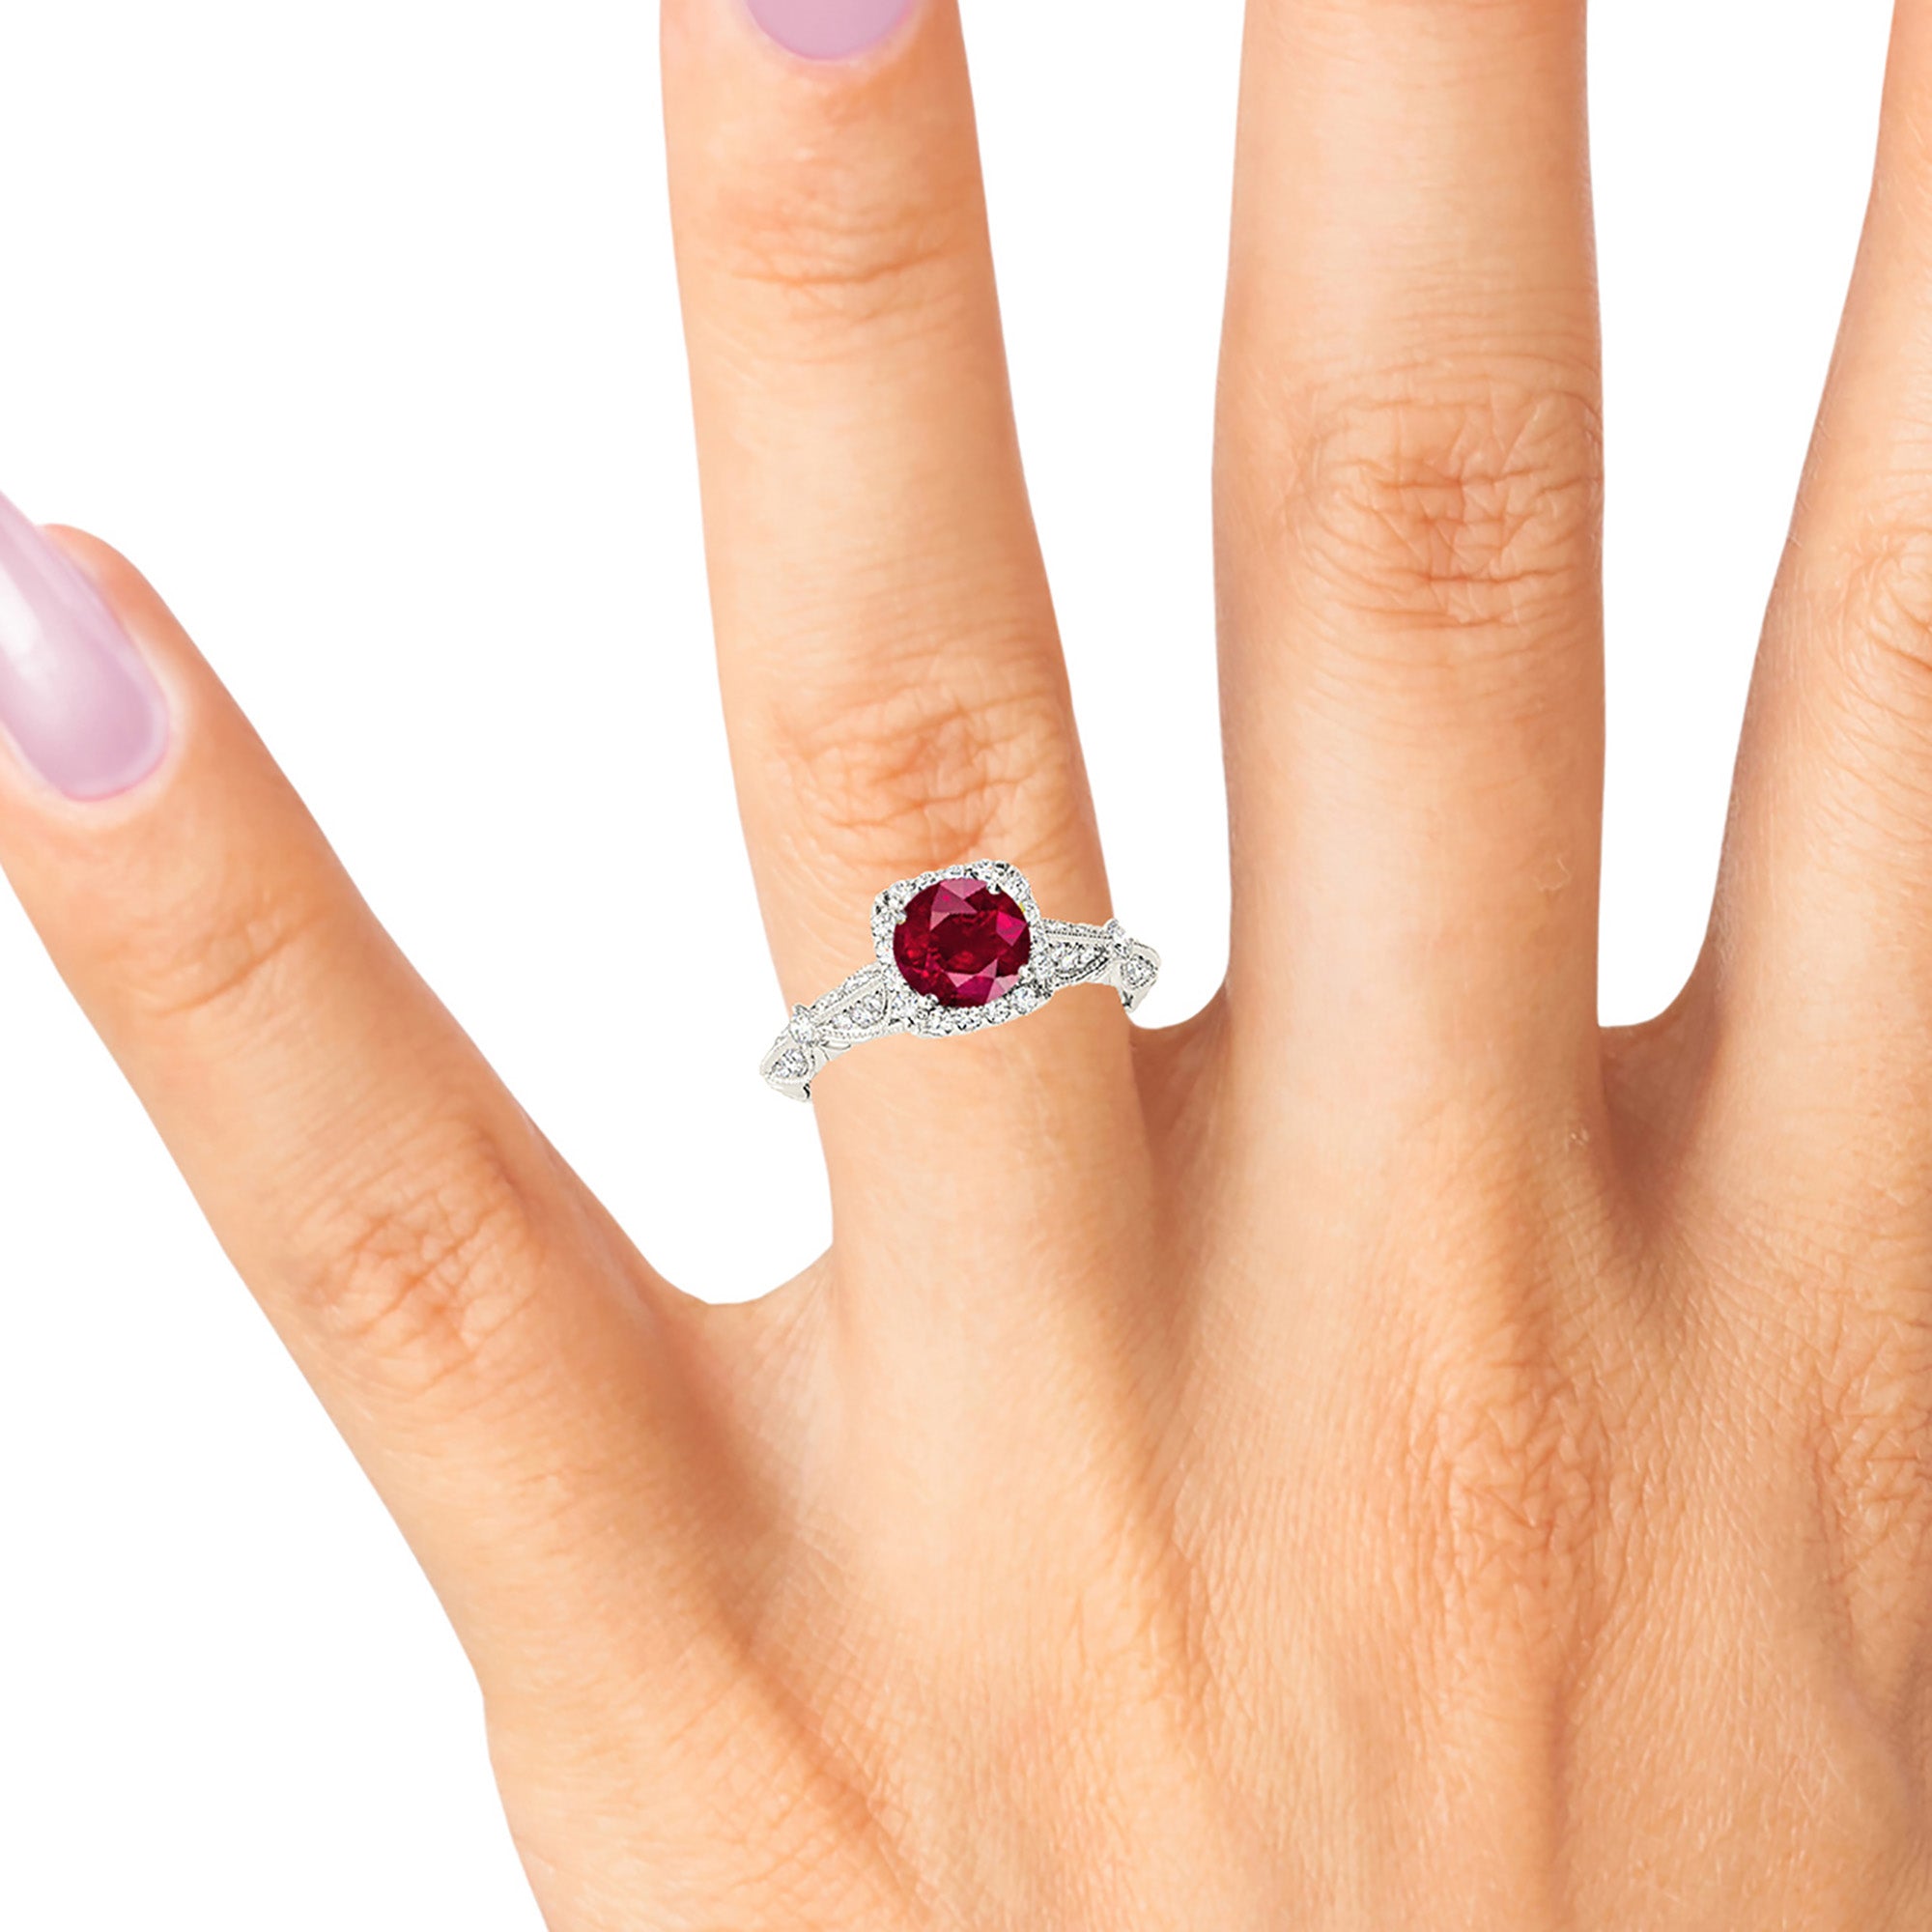 1.35 ct. Genuine Round Ruby With 0.35 ctw. Diamond Square Halo ,Milgrain Floral Diamond Band | Round Ruby Fancy Halo Ring| Natural Ruby Ring-in 14K/18K White, Yellow, Rose Gold and Platinum - Christmas Jewelry Gift -VIRABYANI